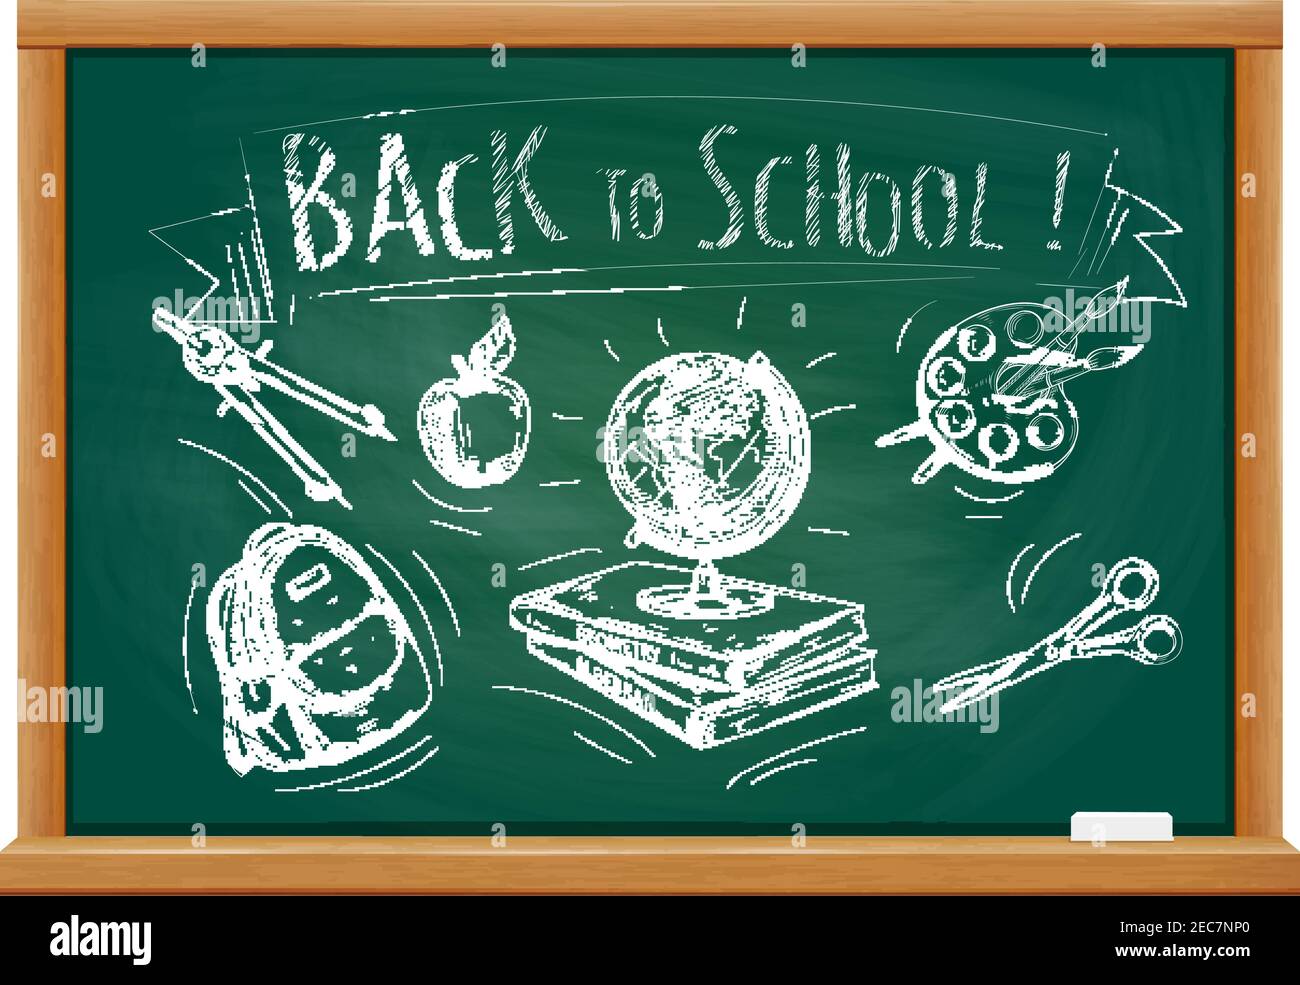 Back to School welcome banner with green blackboard and chalk doodle sketch icons of school supplies compass, apple, backpack, rucksack, globe, books, Stock Vector